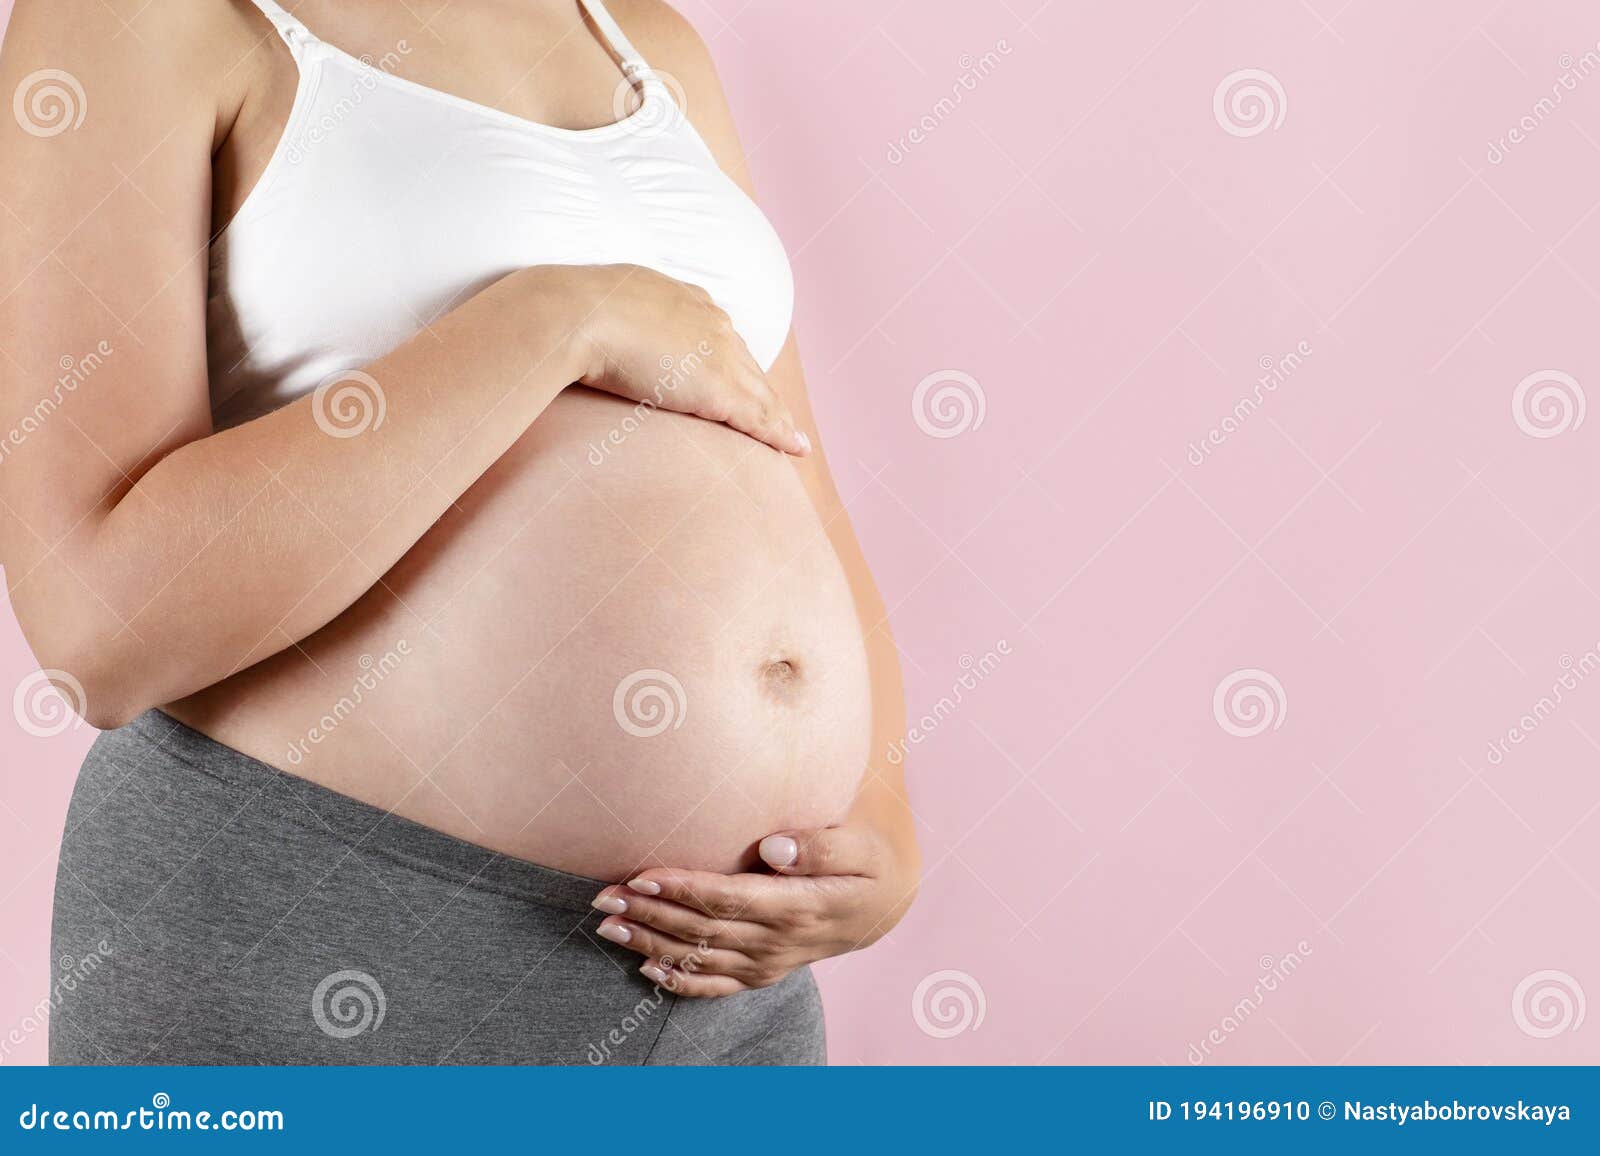 https://thumbs.dreamstime.com/z/close-up-pregnant-woman-wearing-supportive-seamless-maternity-bra-grey-yoga-pants-arms-her-belly-female-hands-wrapped-around-194196910.jpg